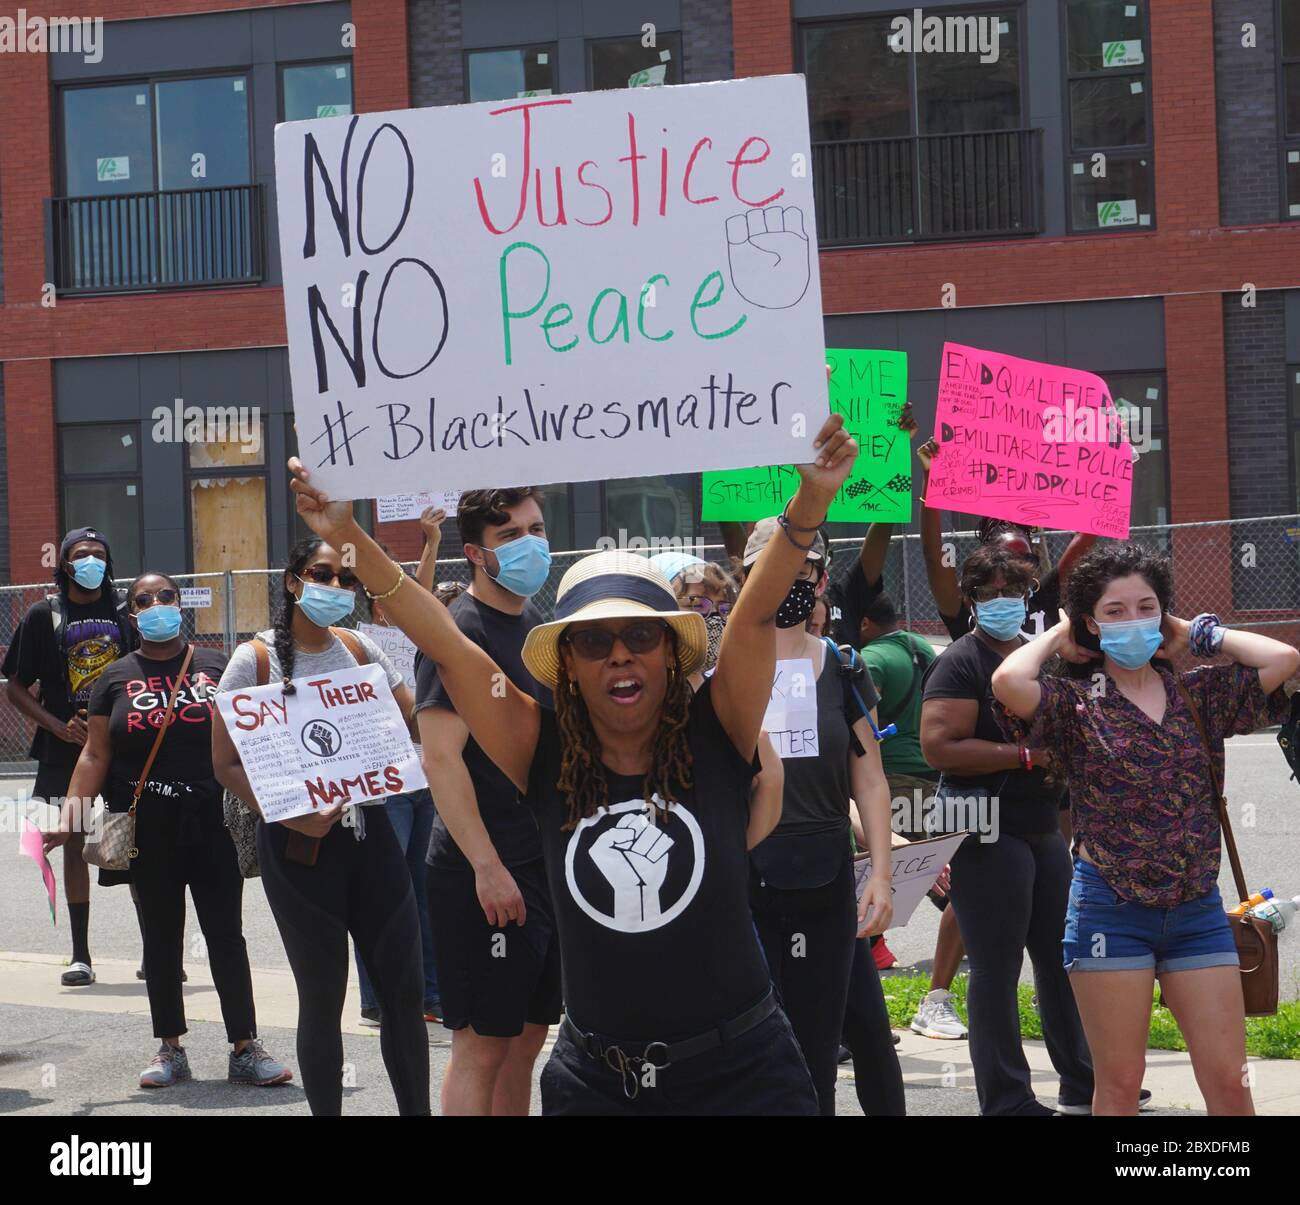 George Floyd Protest - No Justice No Peace - Hackensack, New Jersey, USA - June 6th, 2020 Stock Photo